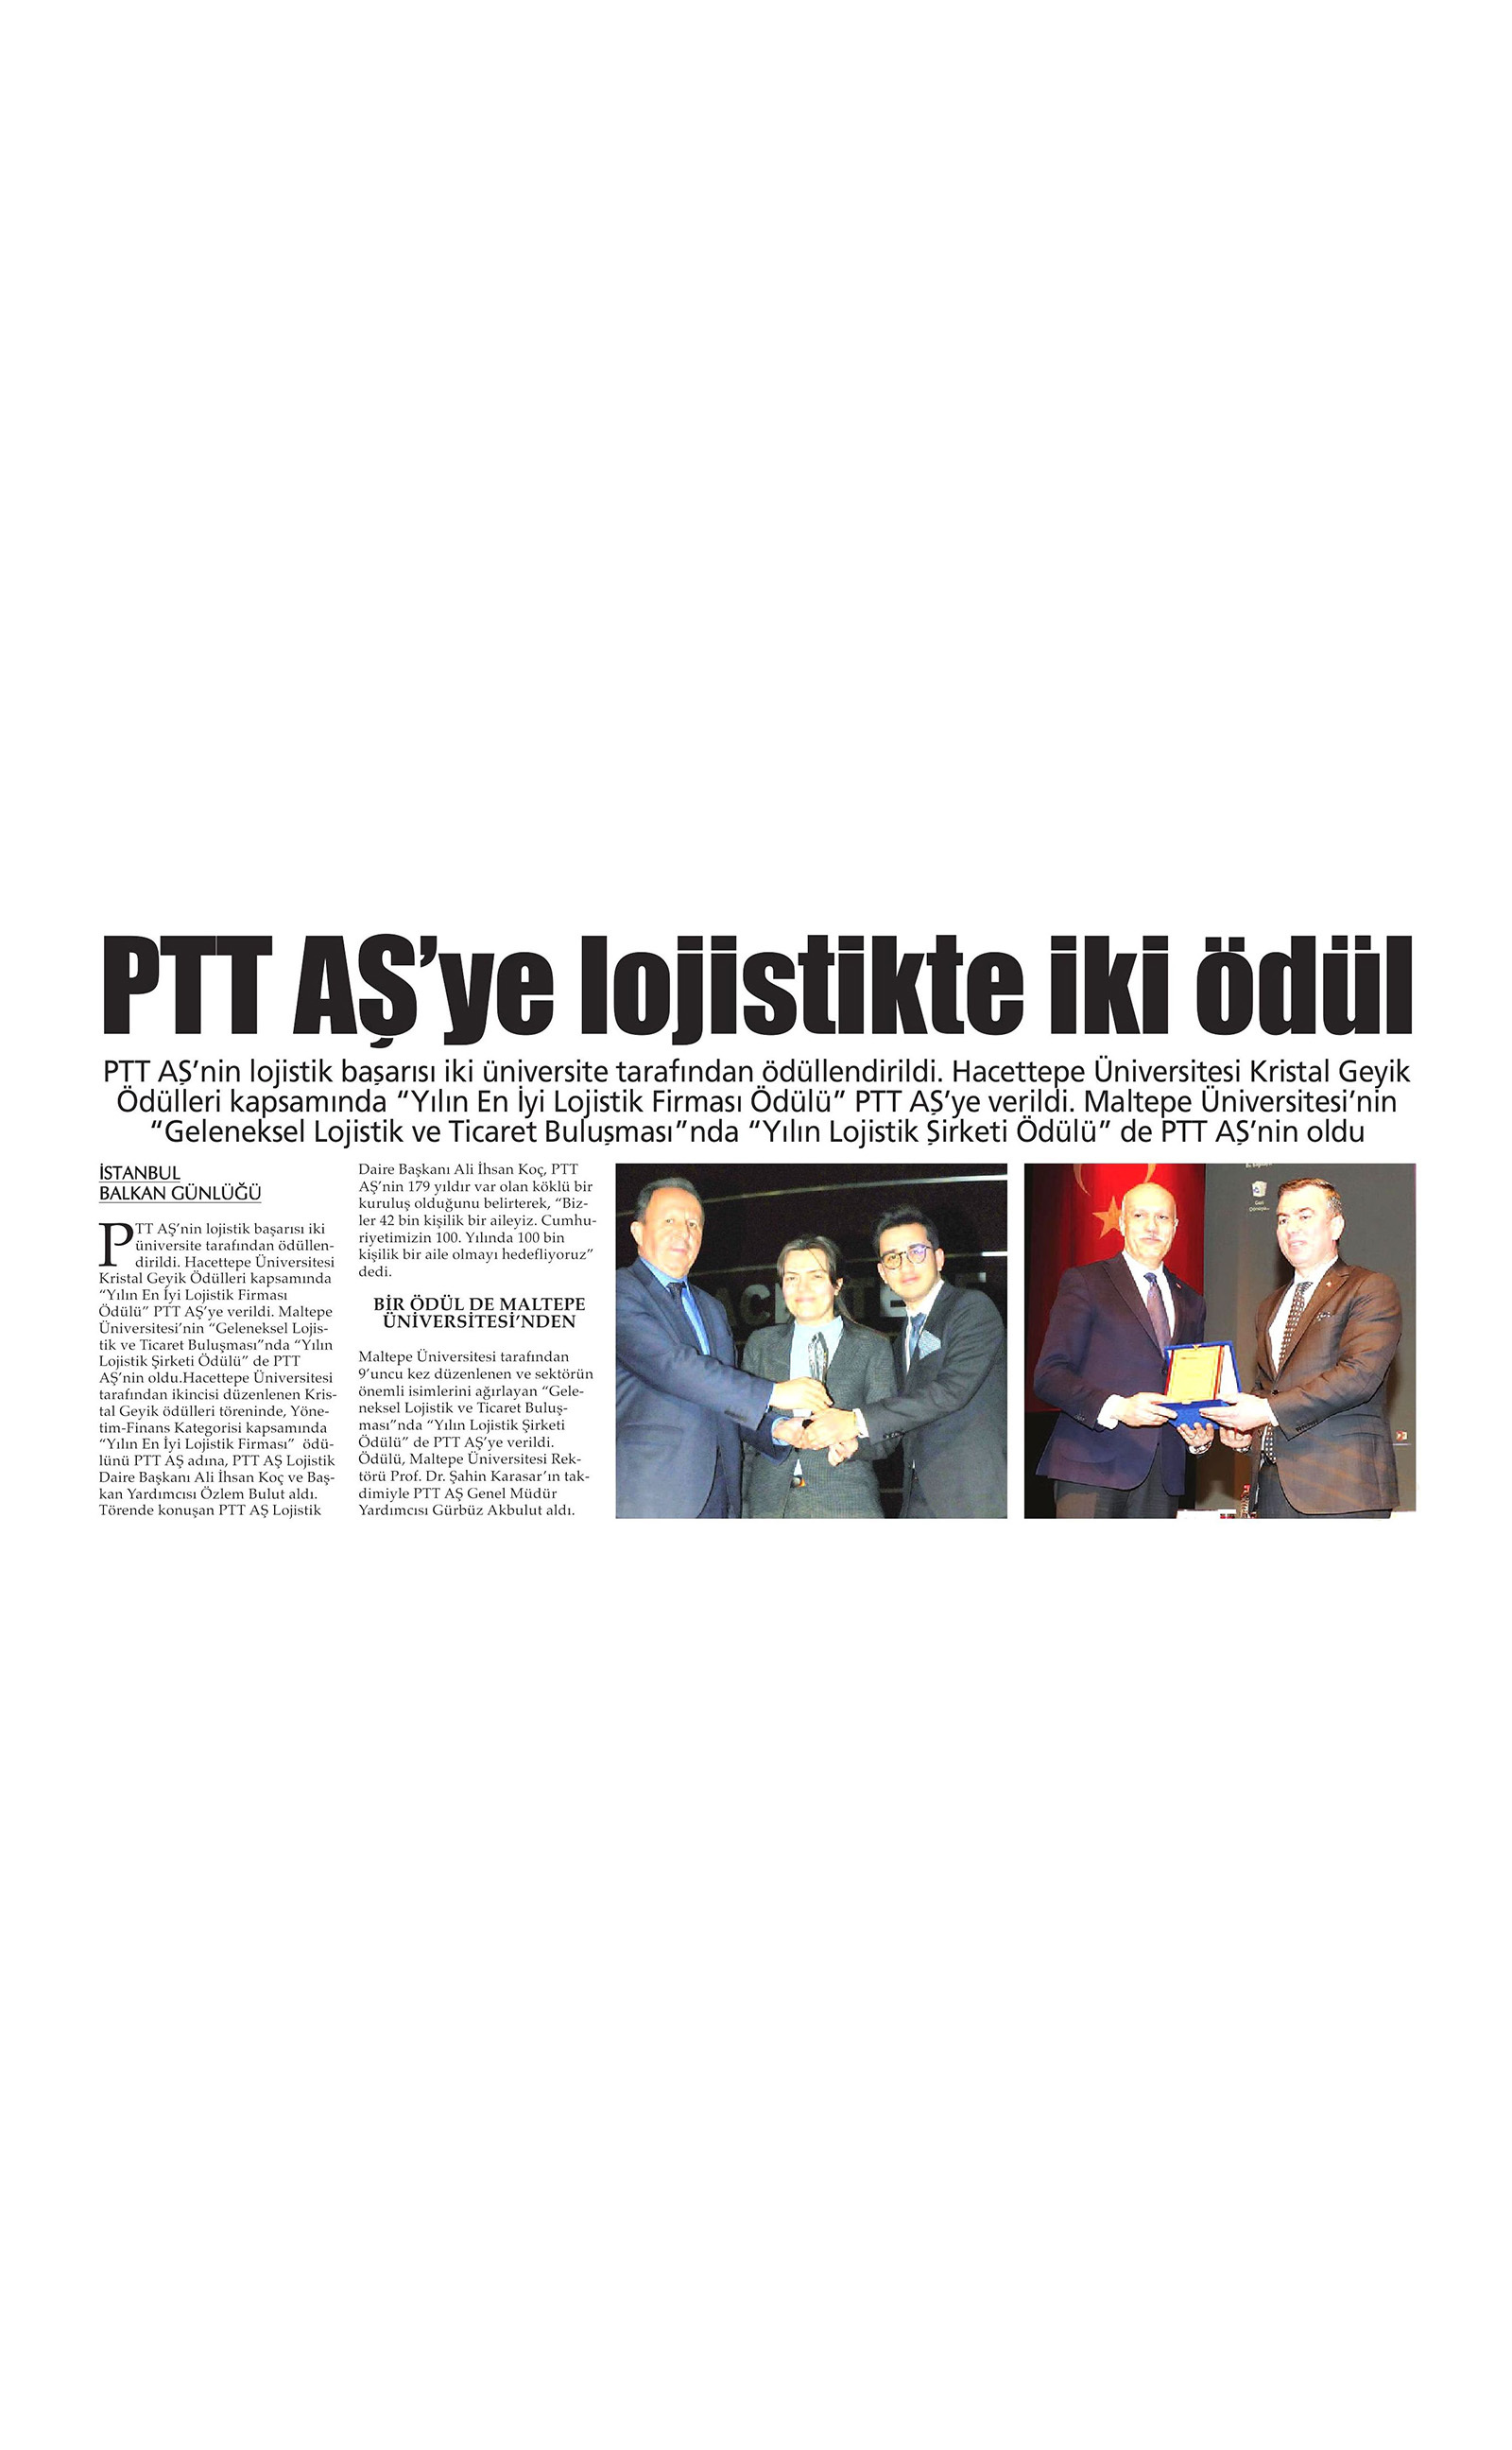 Two awards to PTT AŞ in logistics